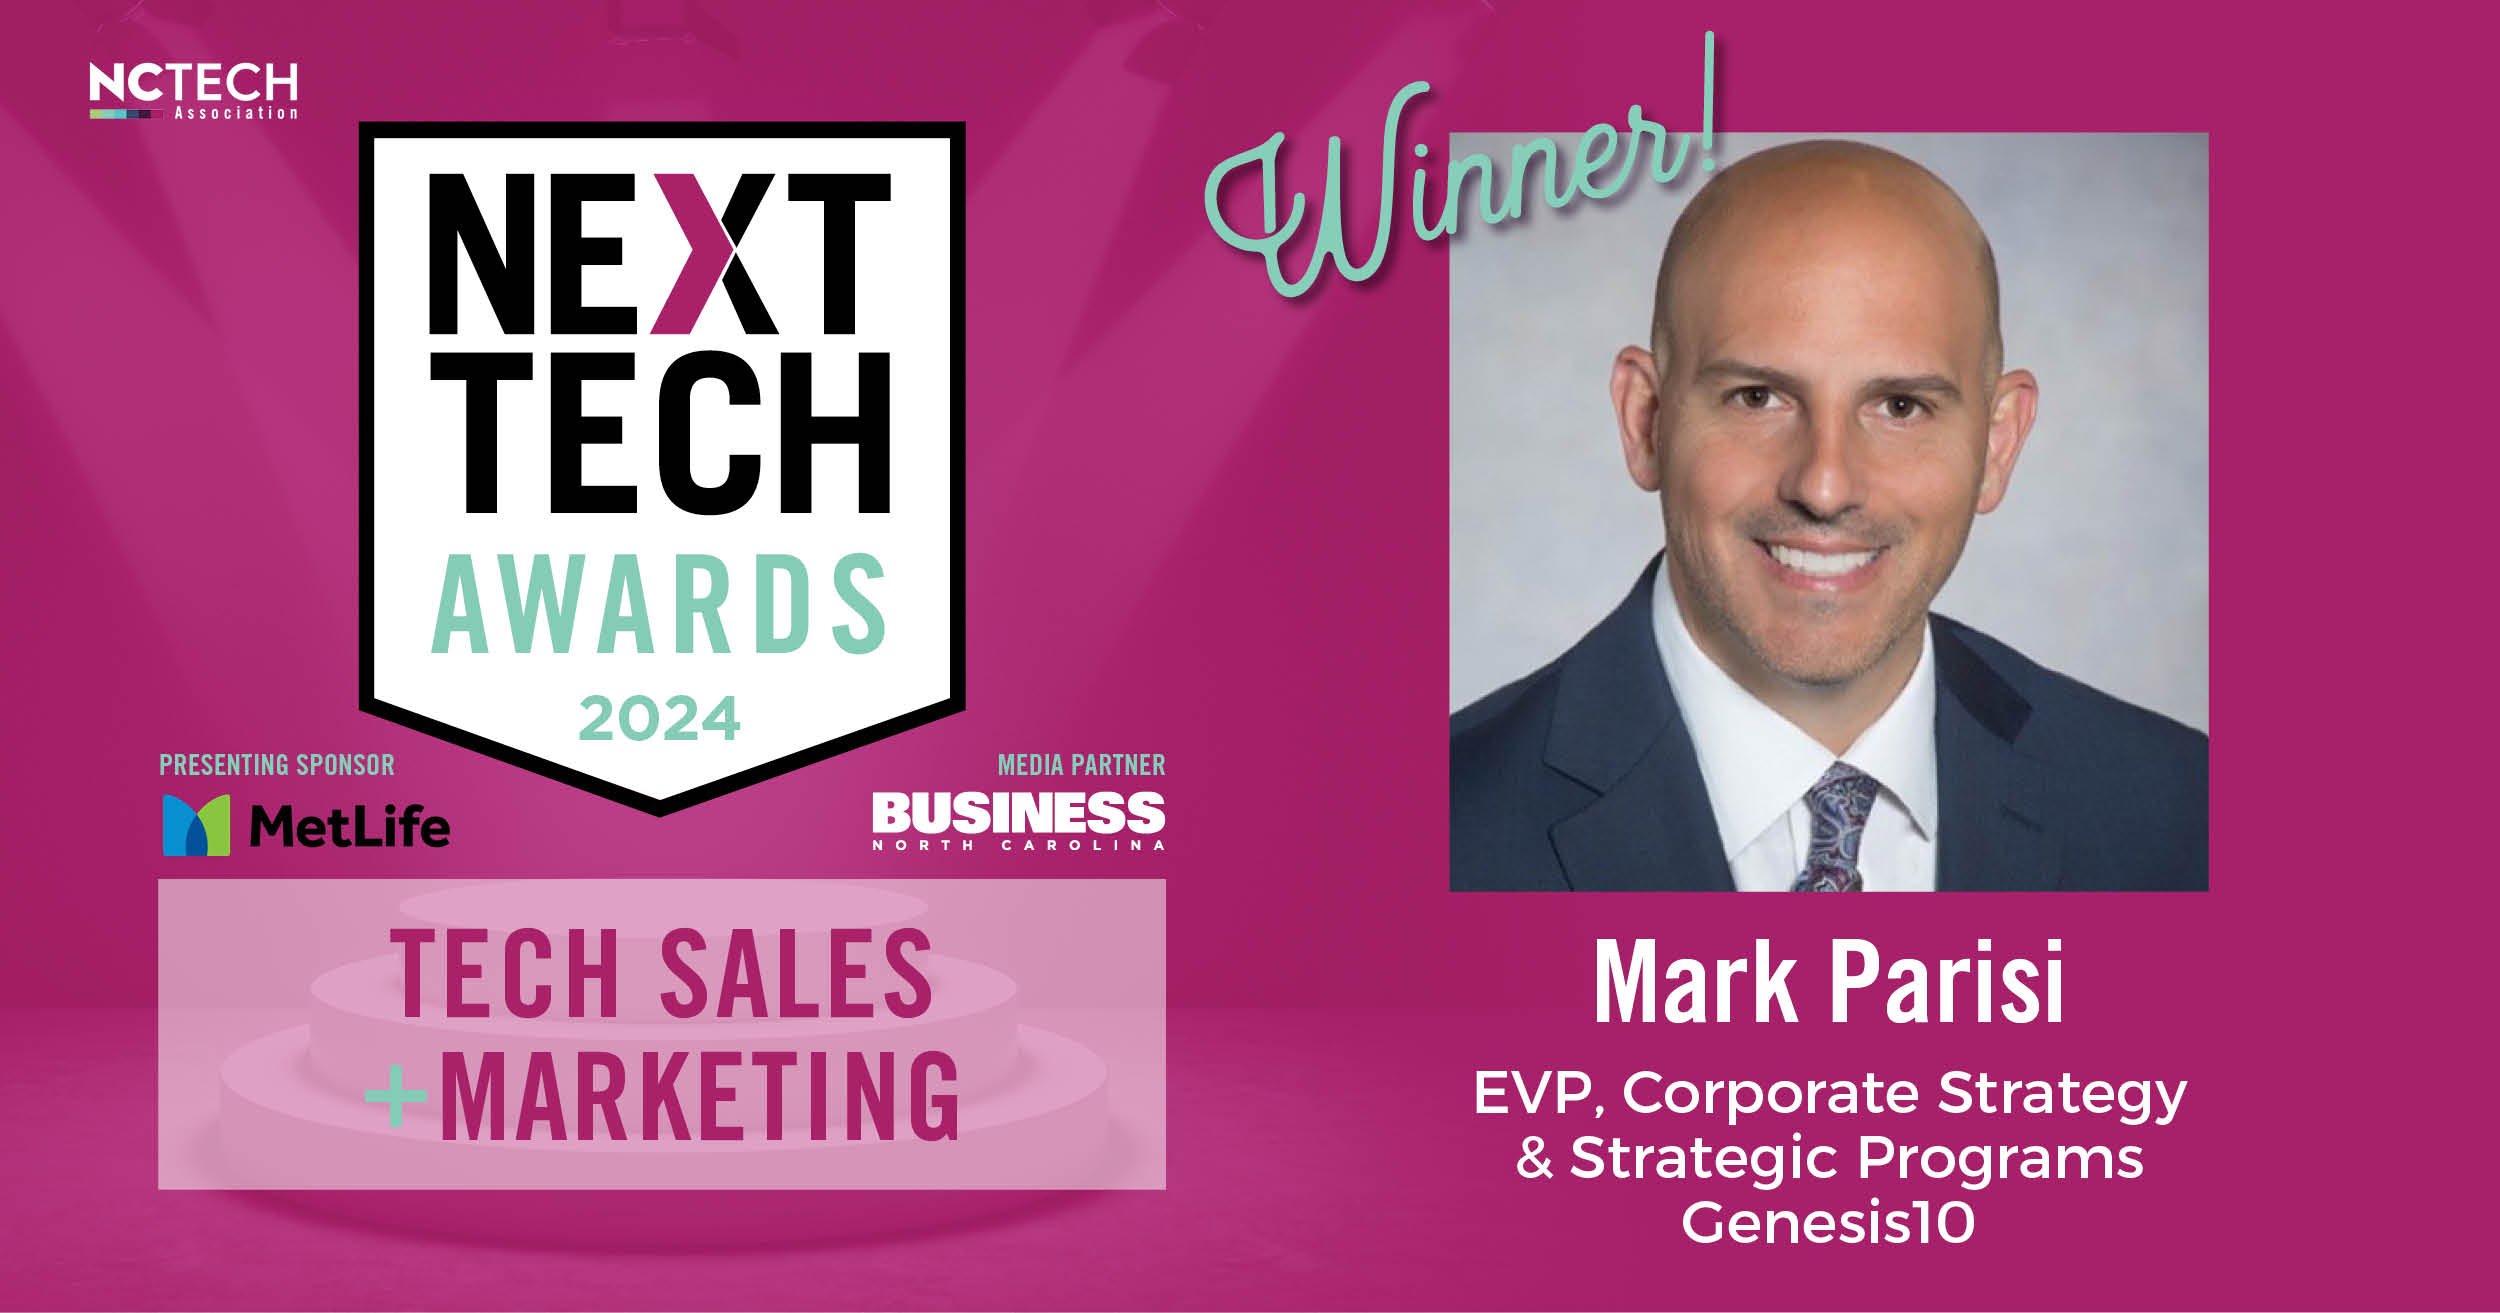 Mark Parisi Winner of 2024 Next Tech Awards in the Tech Sales and Marketing section